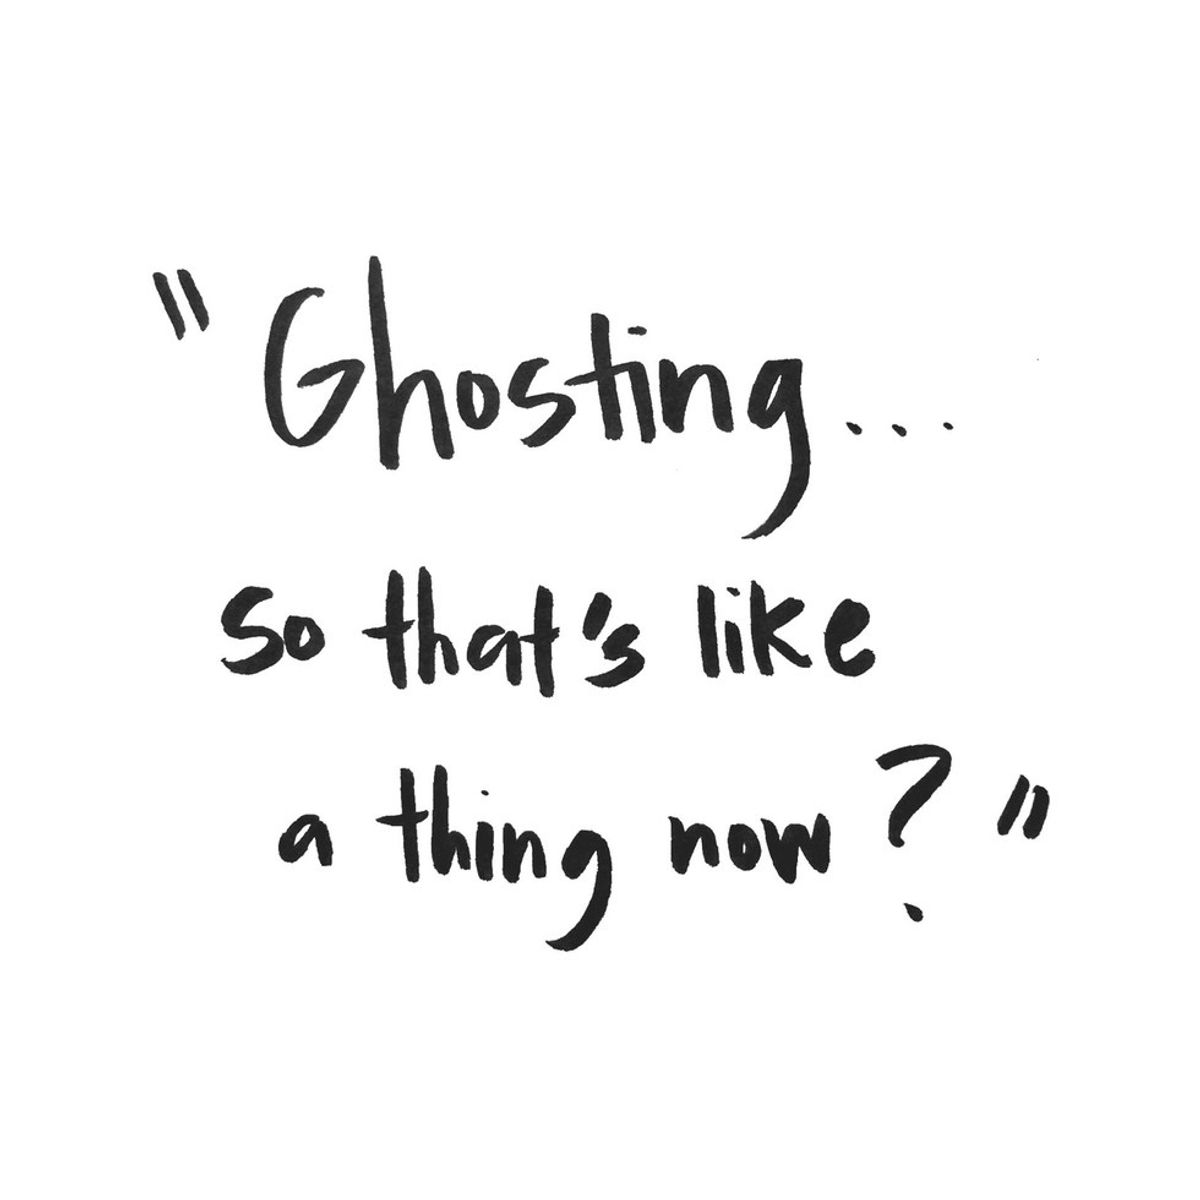 Let's Talk About Ghosting